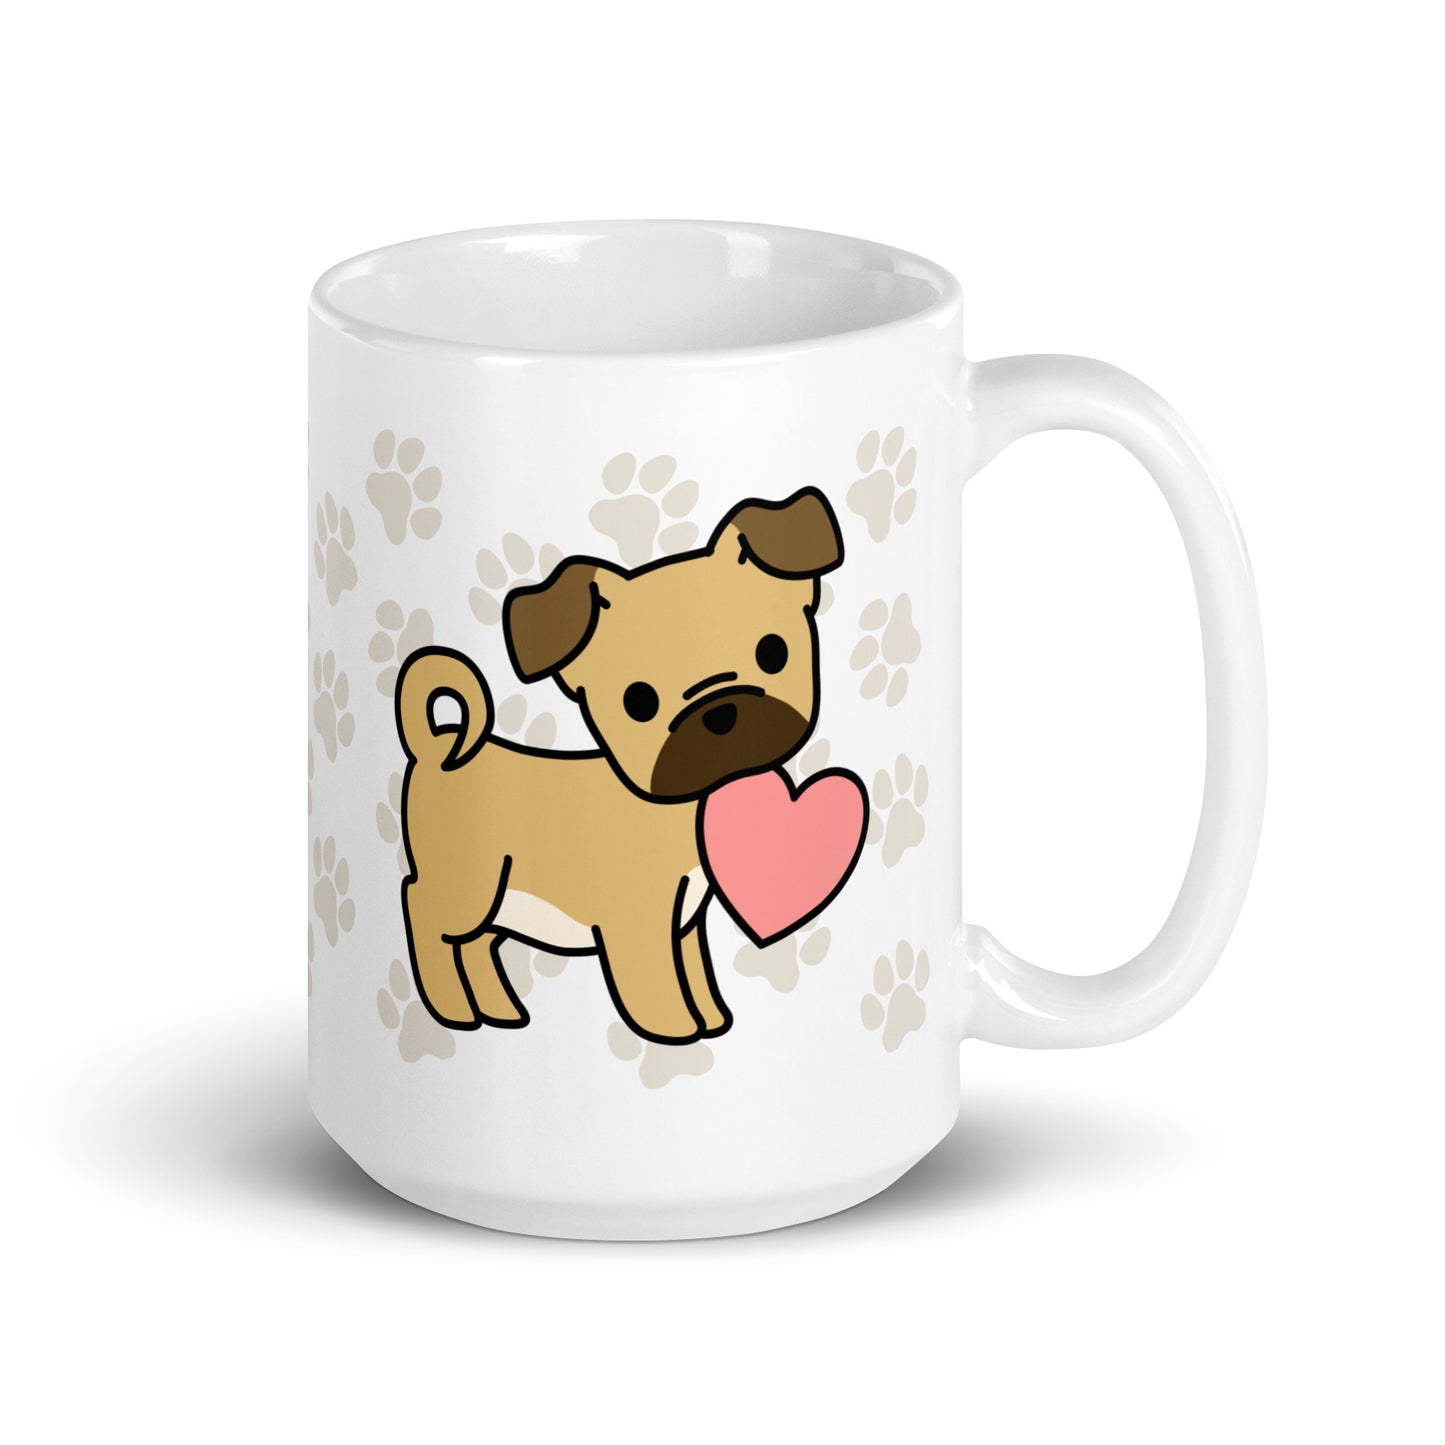 A white 15 ounce ceramic mug with a pattern of light brown pawprints all over. The mug also features a stylized illustration of a Puggle holding a heart in its mouth.